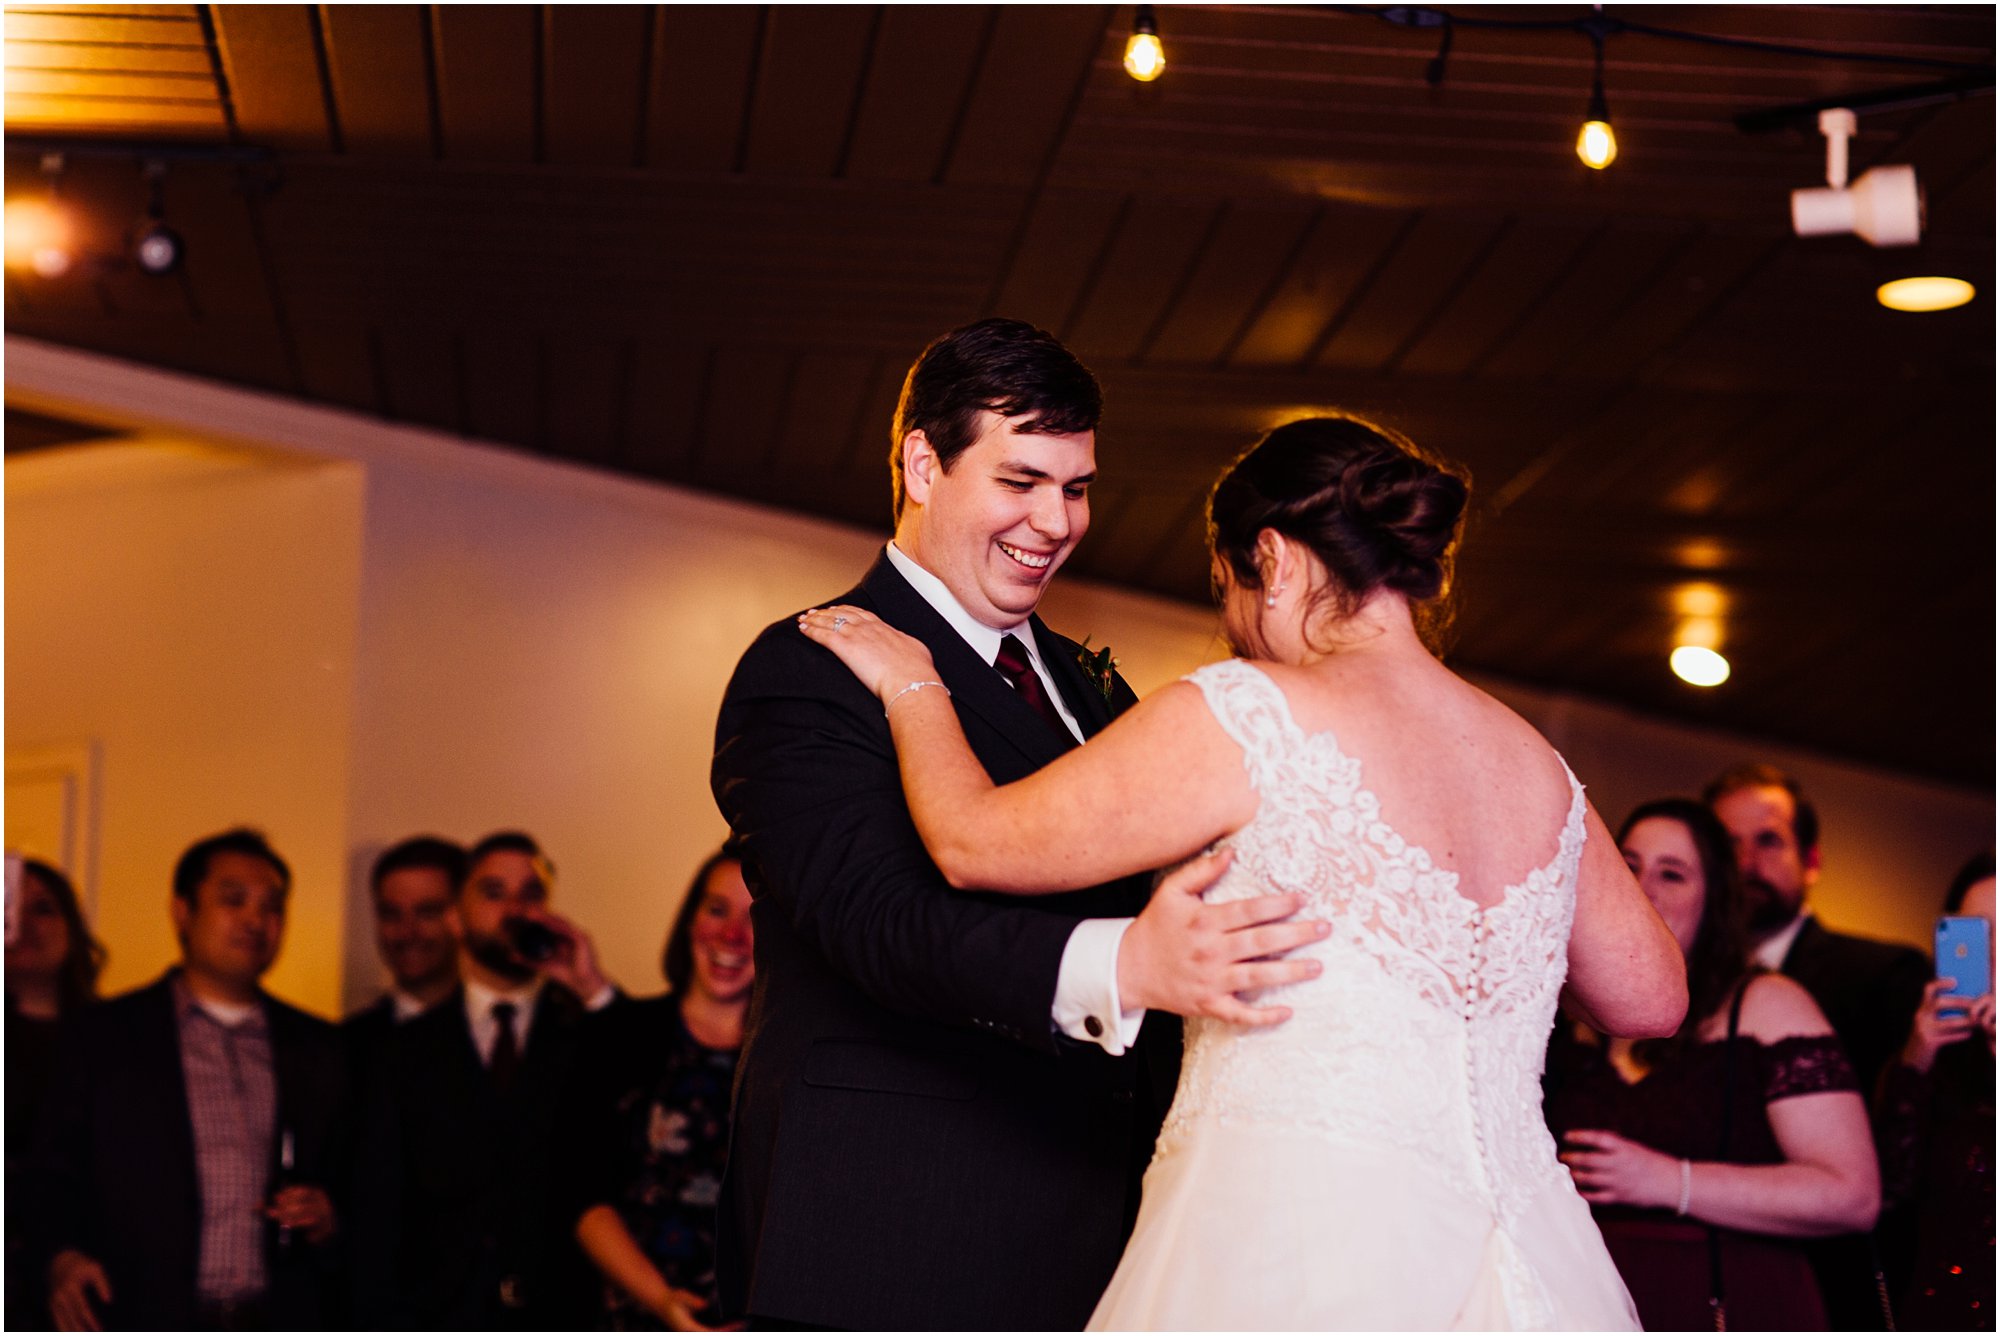 Bride and groom dancing together at Club Windward in Memphis during their first dance